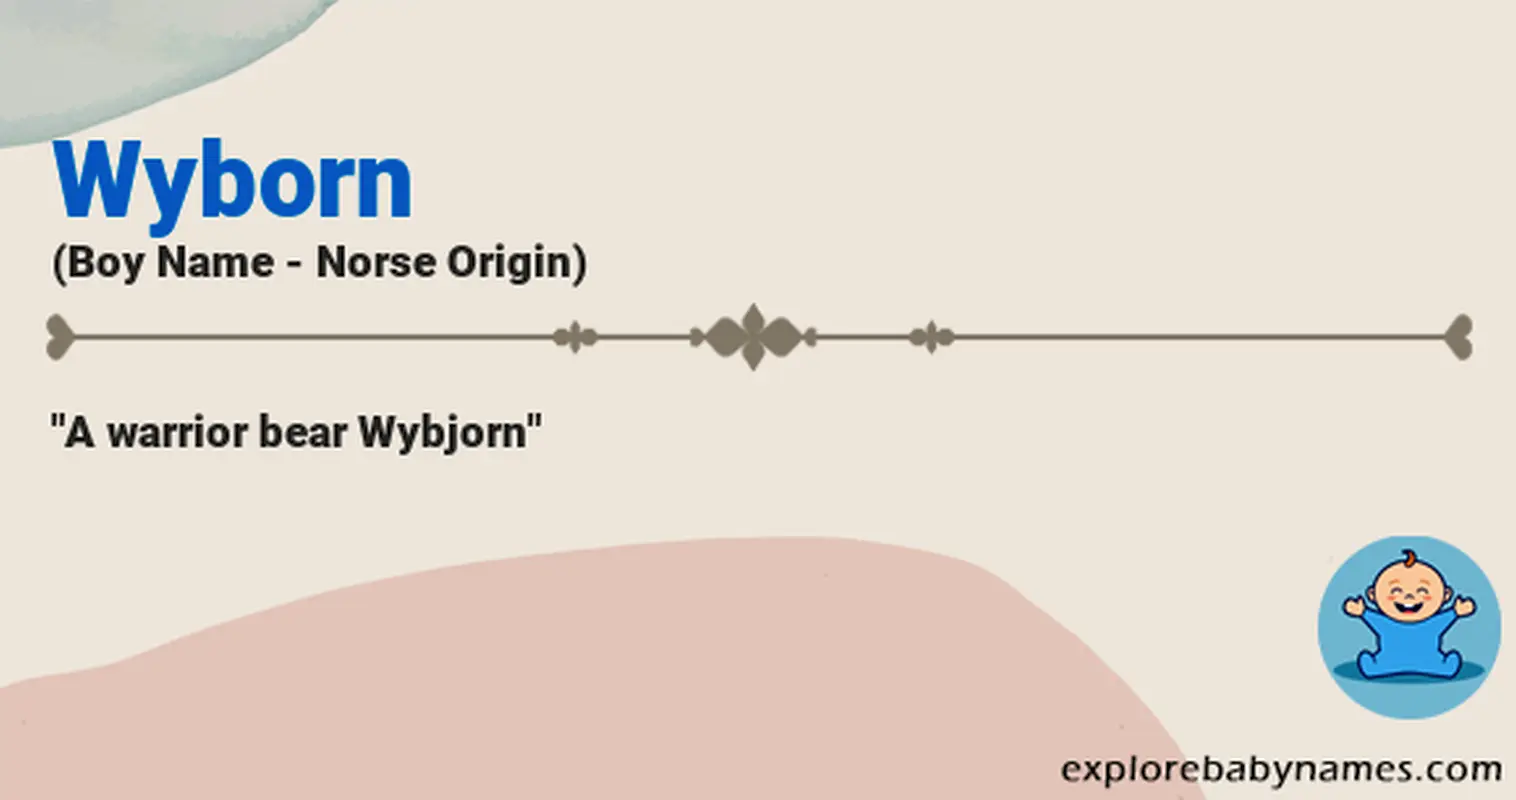 Meaning of Wyborn